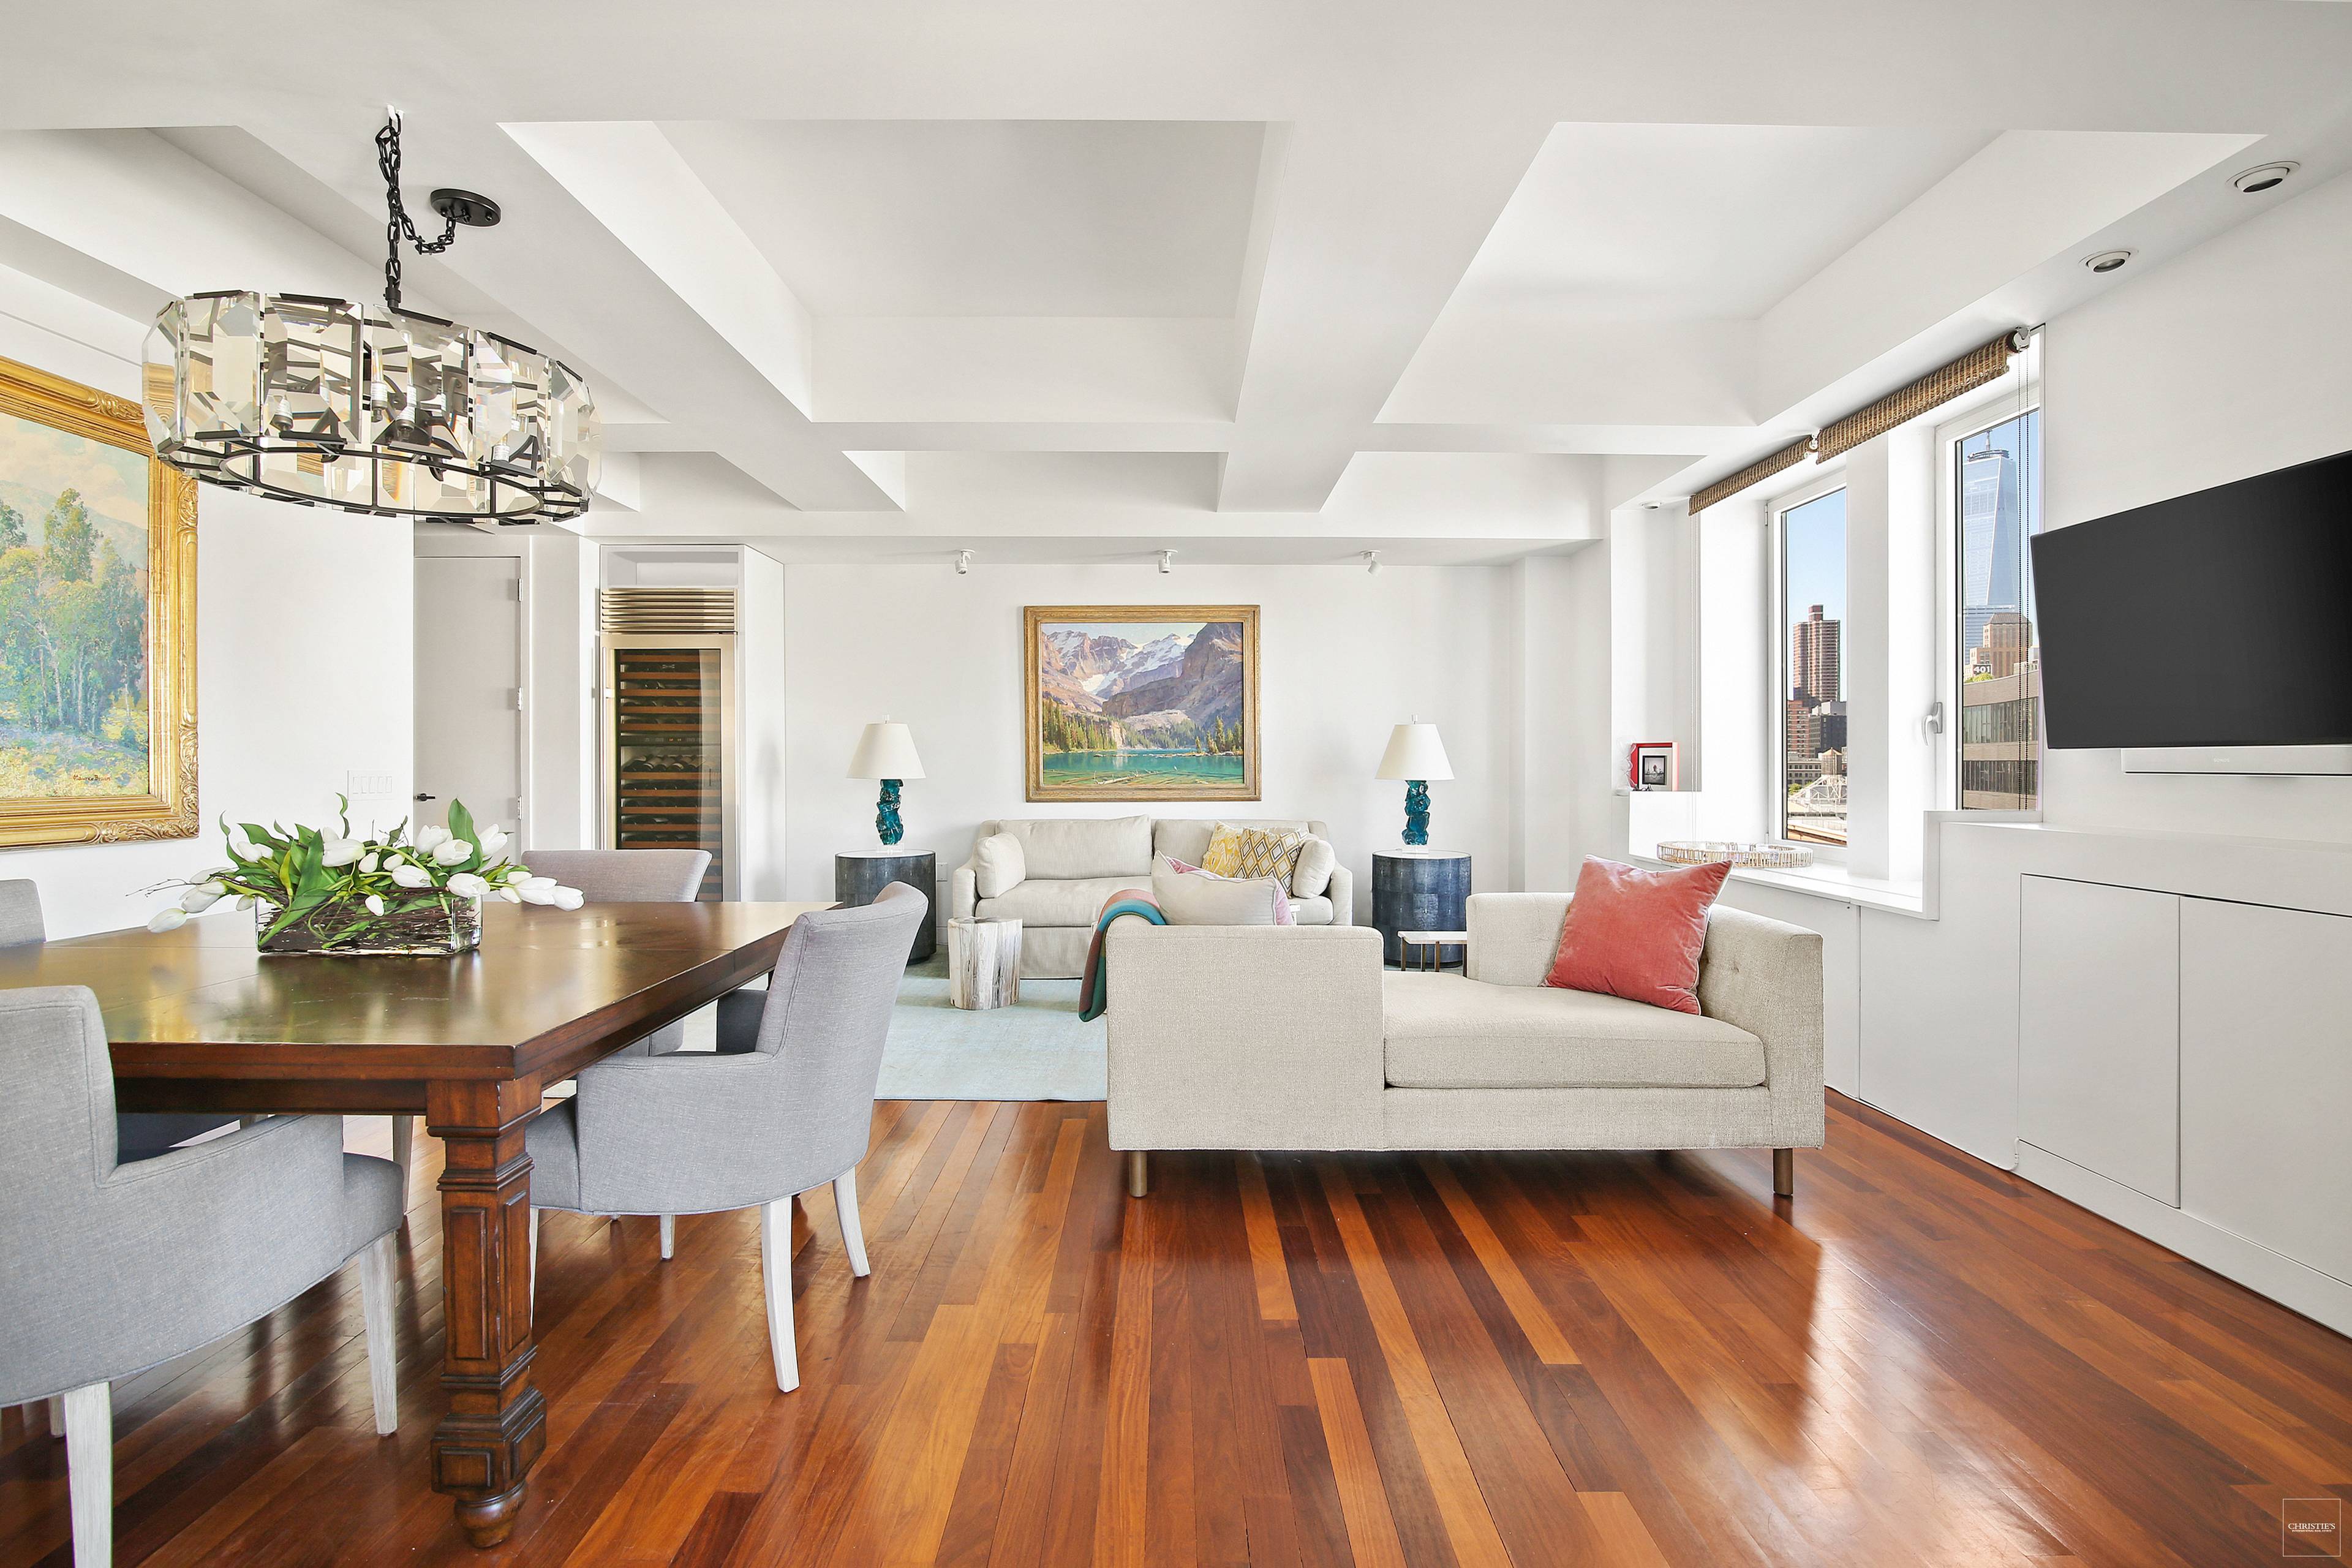 Situated in Cass Gilbert's Beaux Arts SPRING building, this sun splashed split three bedroom apartment is moments from the best shopping and dining New York has to offer.